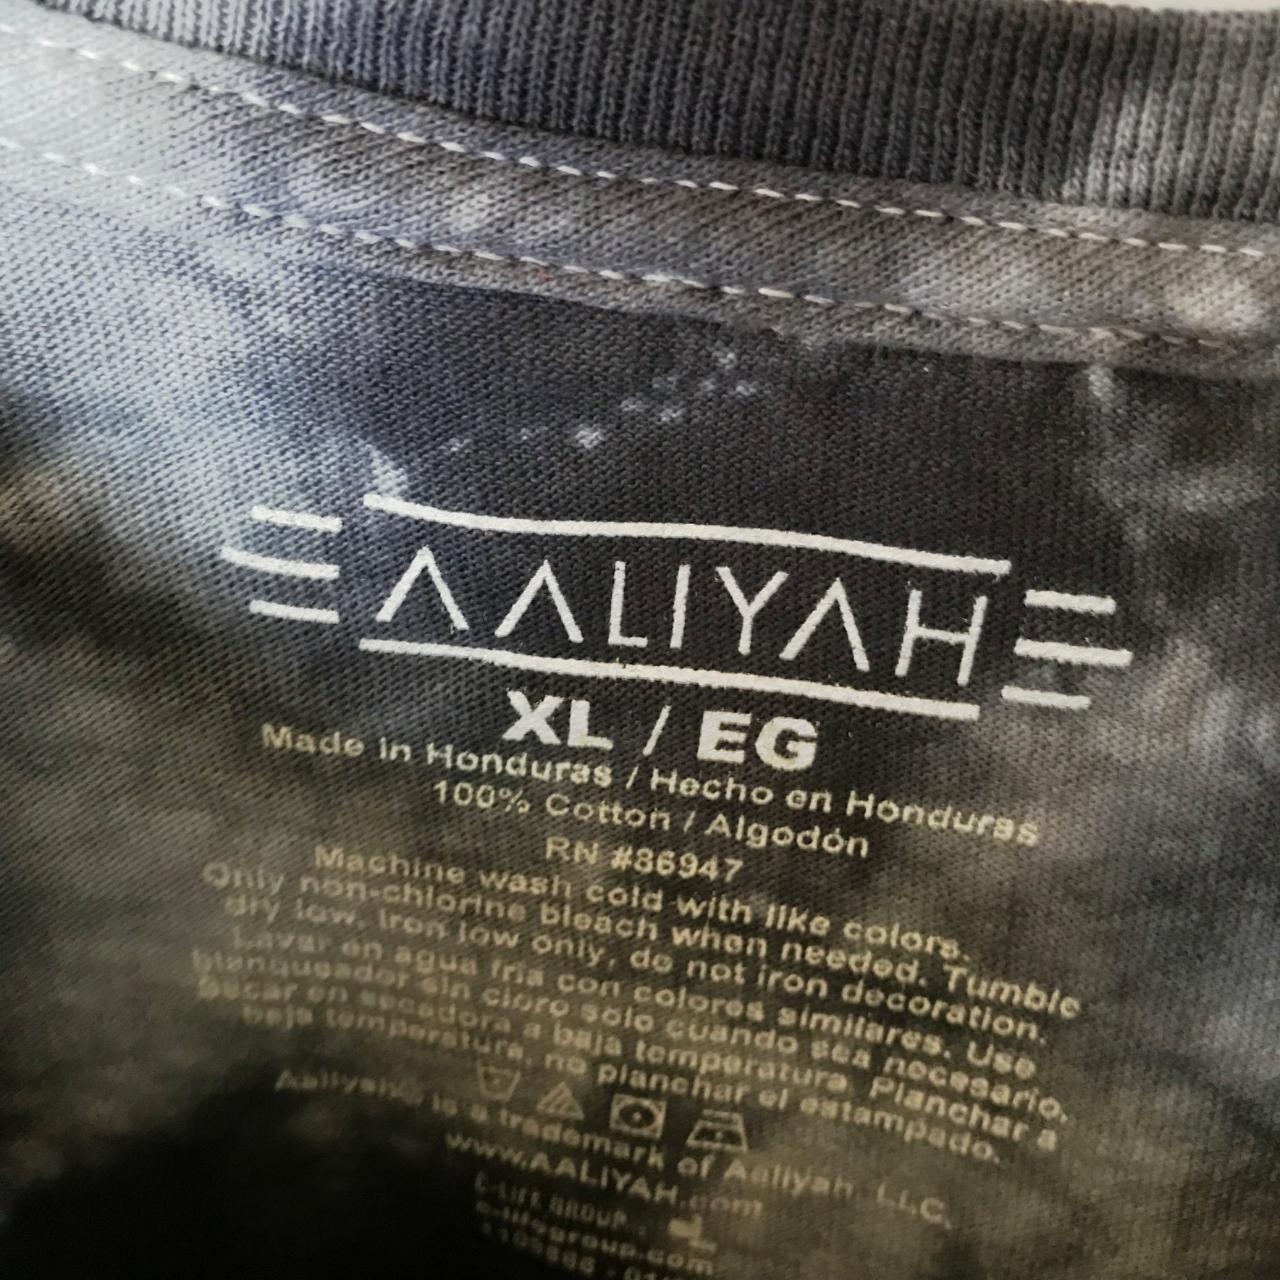 Product Image 3 - NEW Aaliyah Shirt Adult Extra